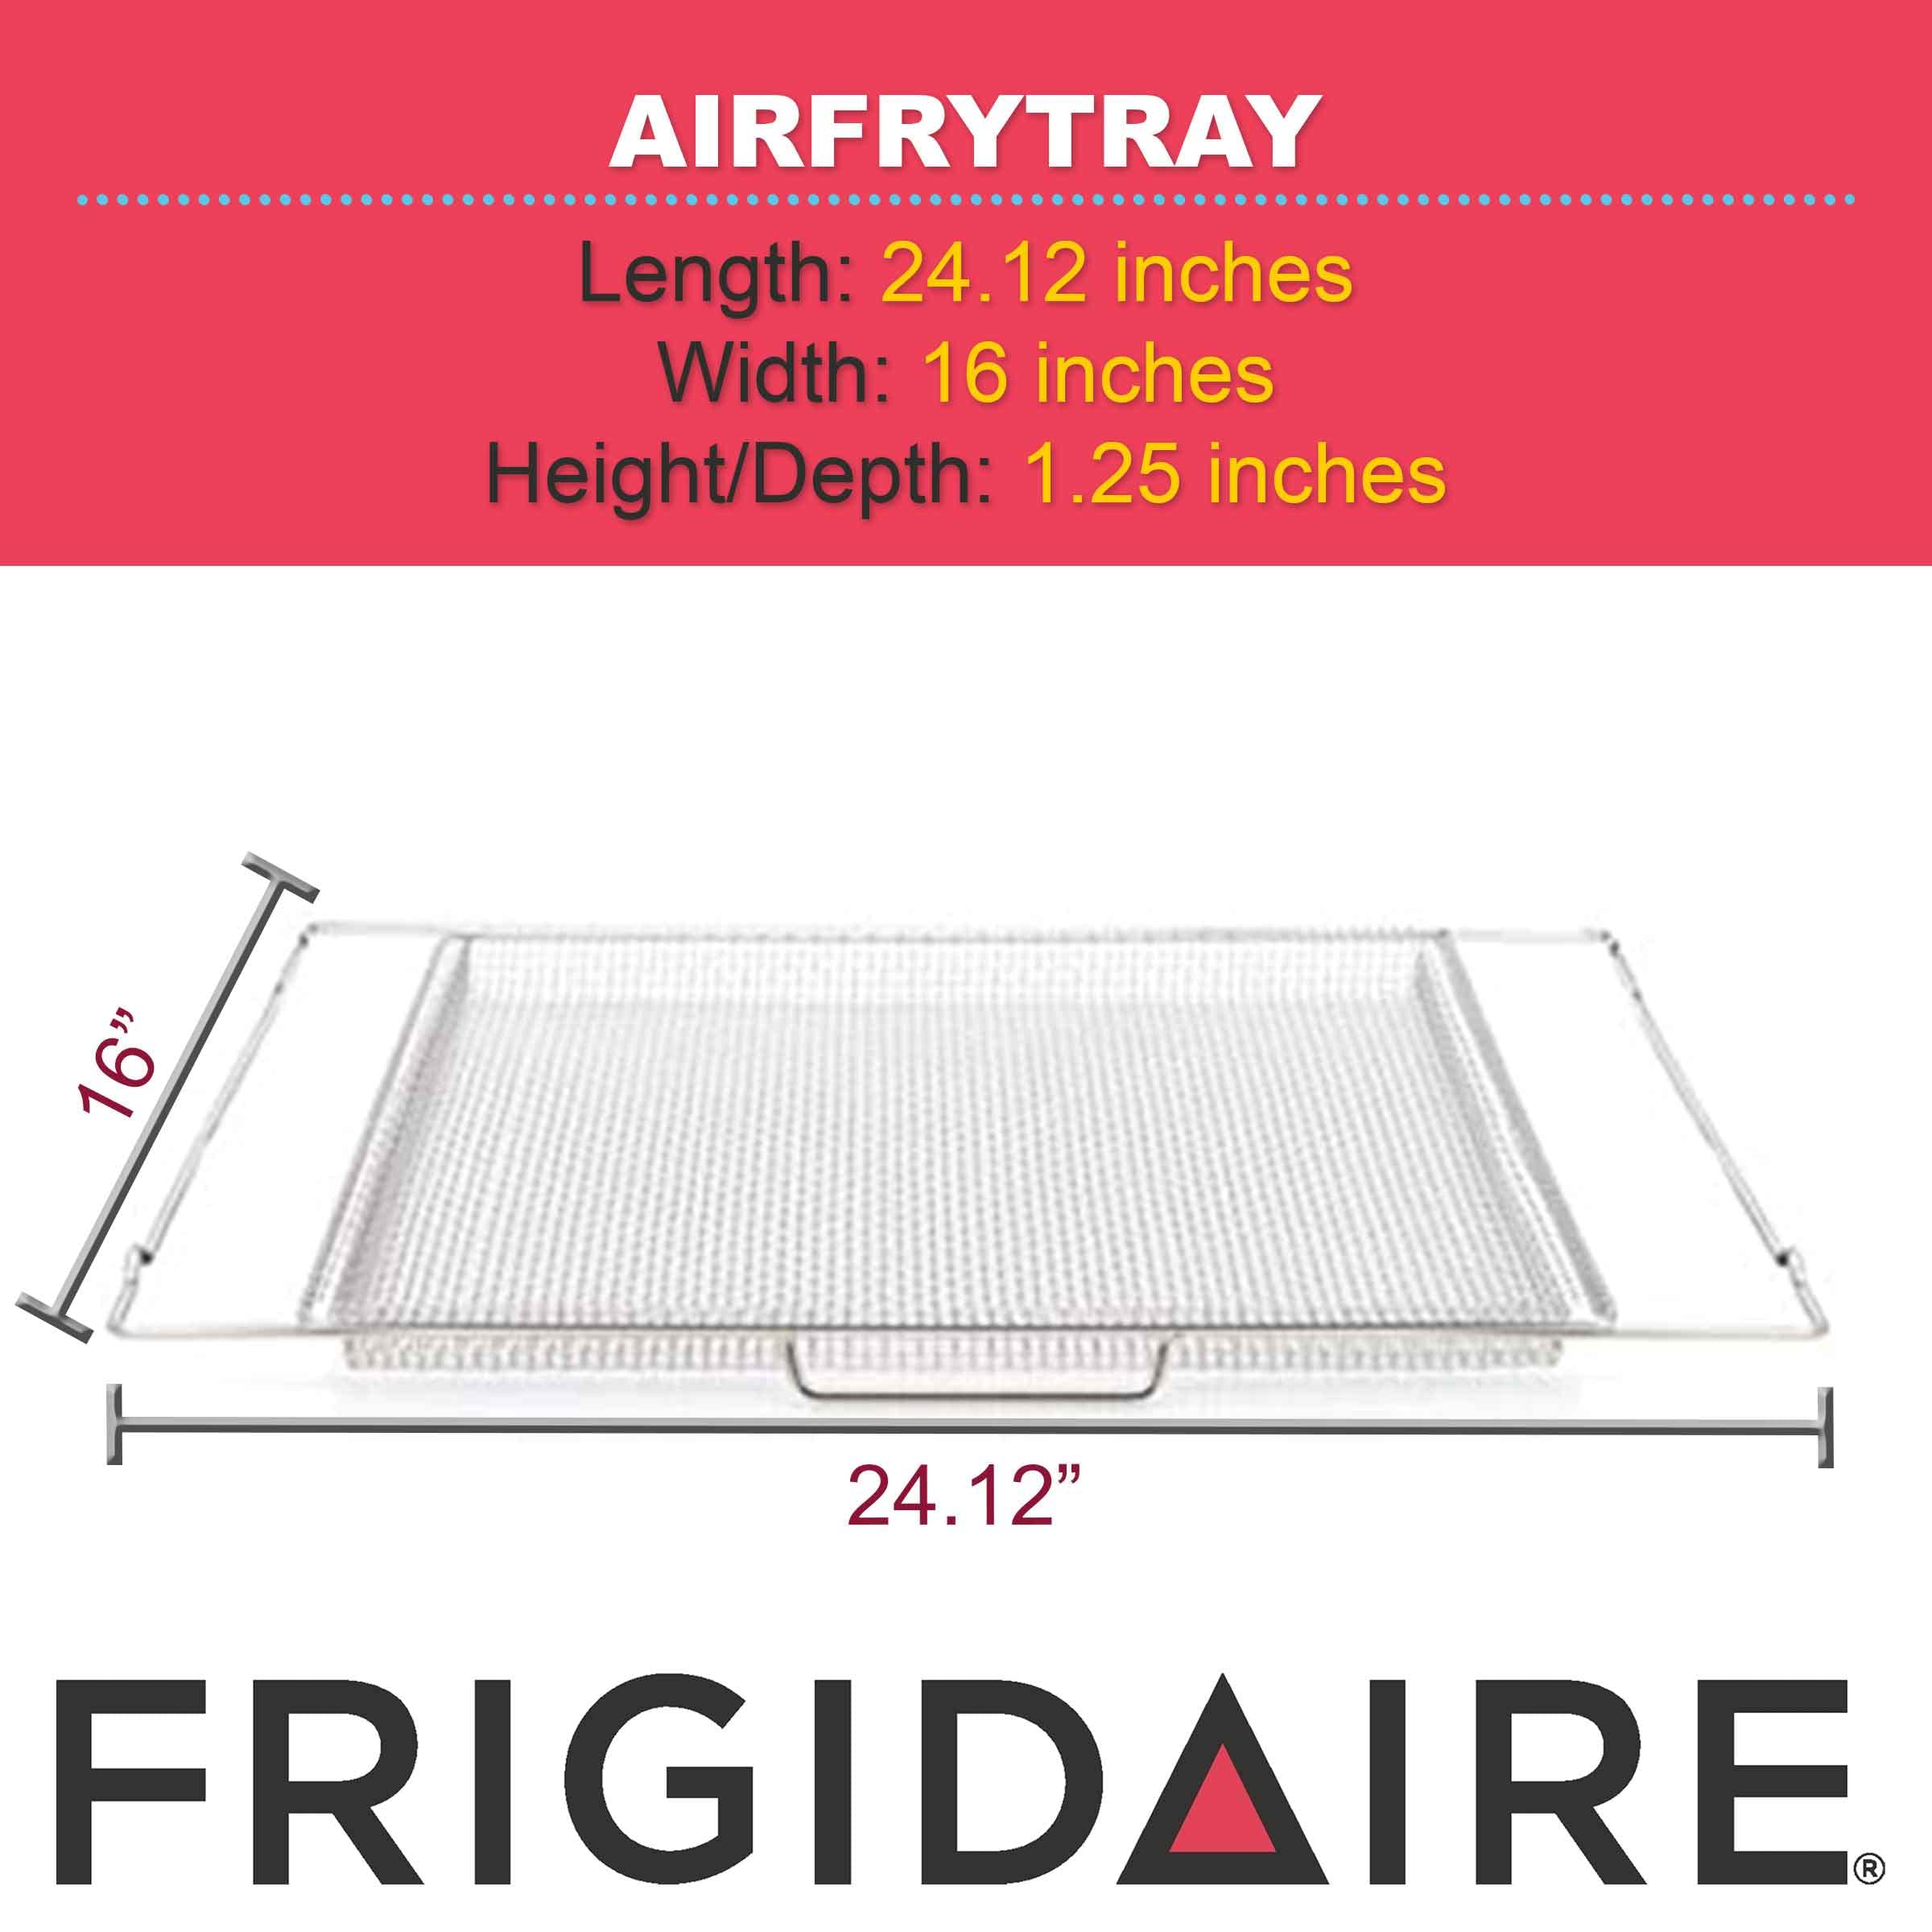 Frigidaire AIRFRYTRAY Ready Cook Oven Insert, Silver